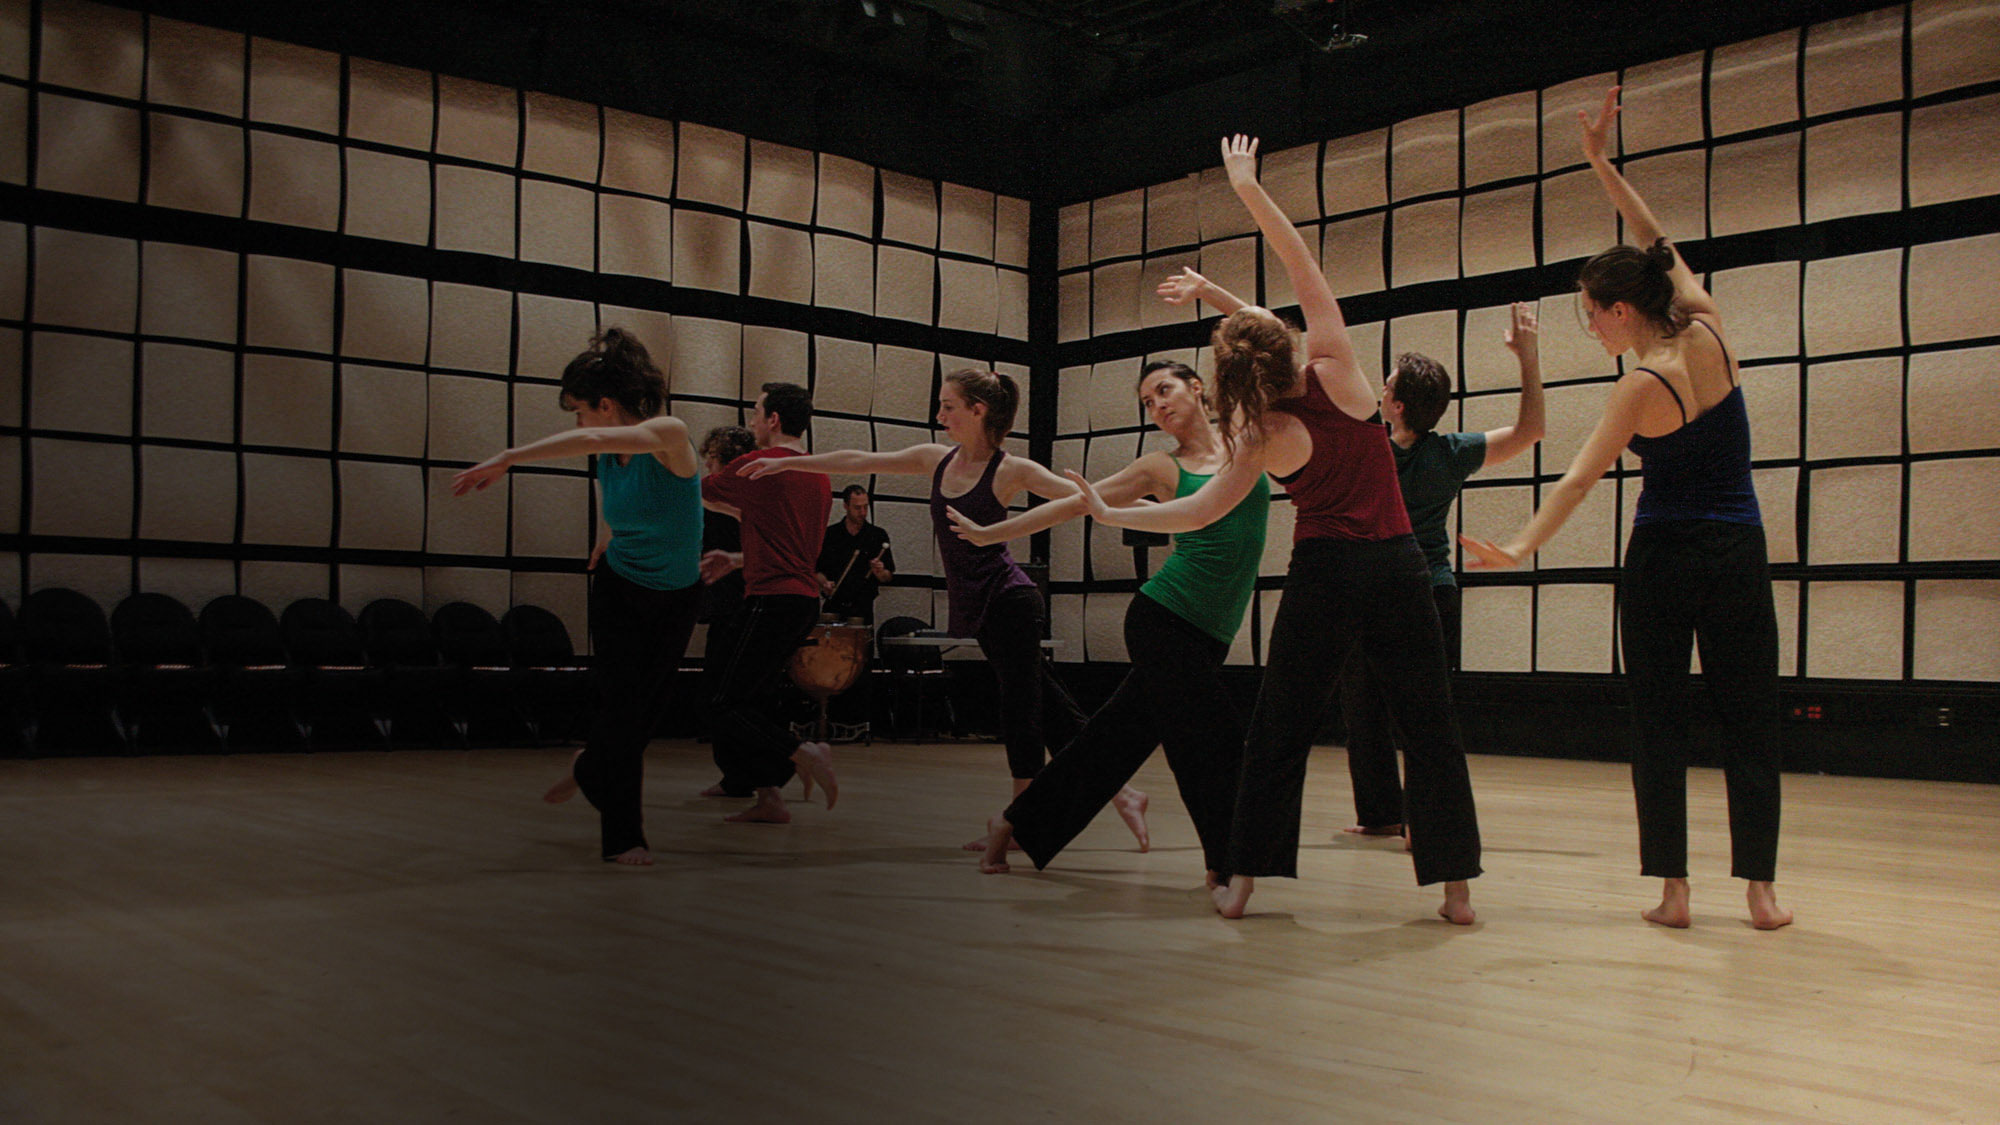 Eight dancers wearing jewel toned tops with black bottoms, moving with arms outstreched in a room with tan acoustic tiles on the walls. 